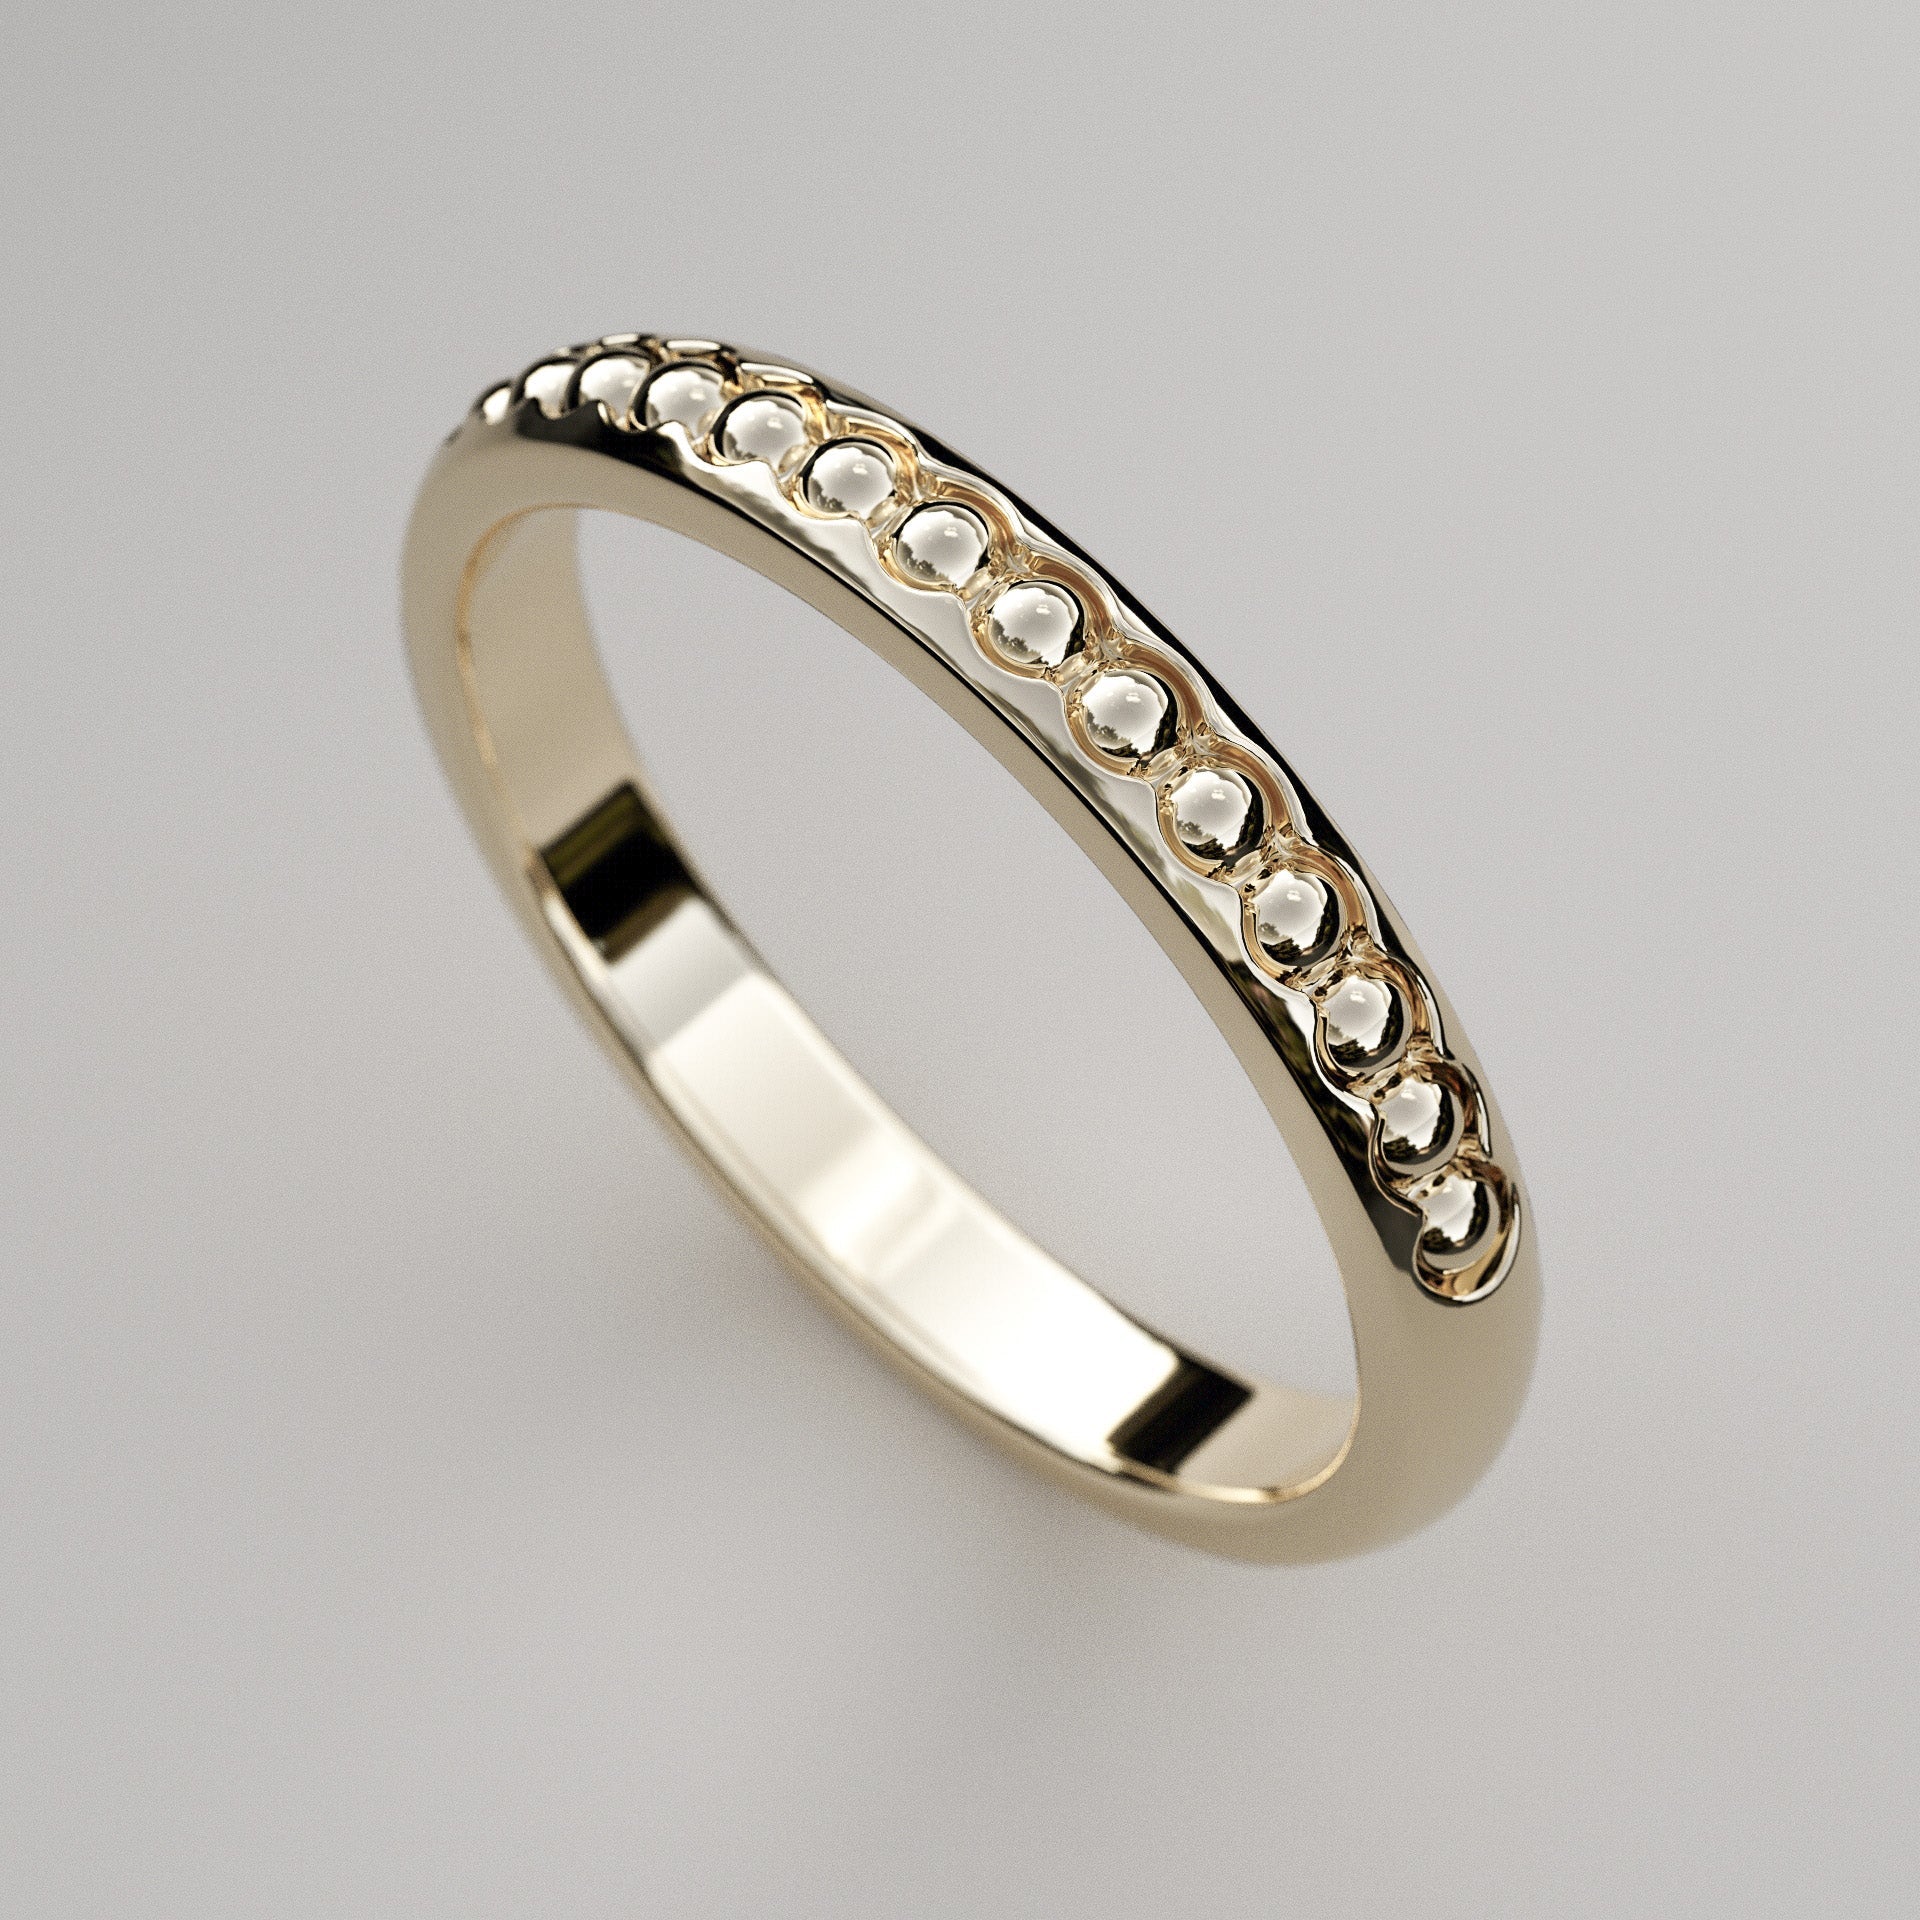 2.5mm wide yellow gold bead wedding band